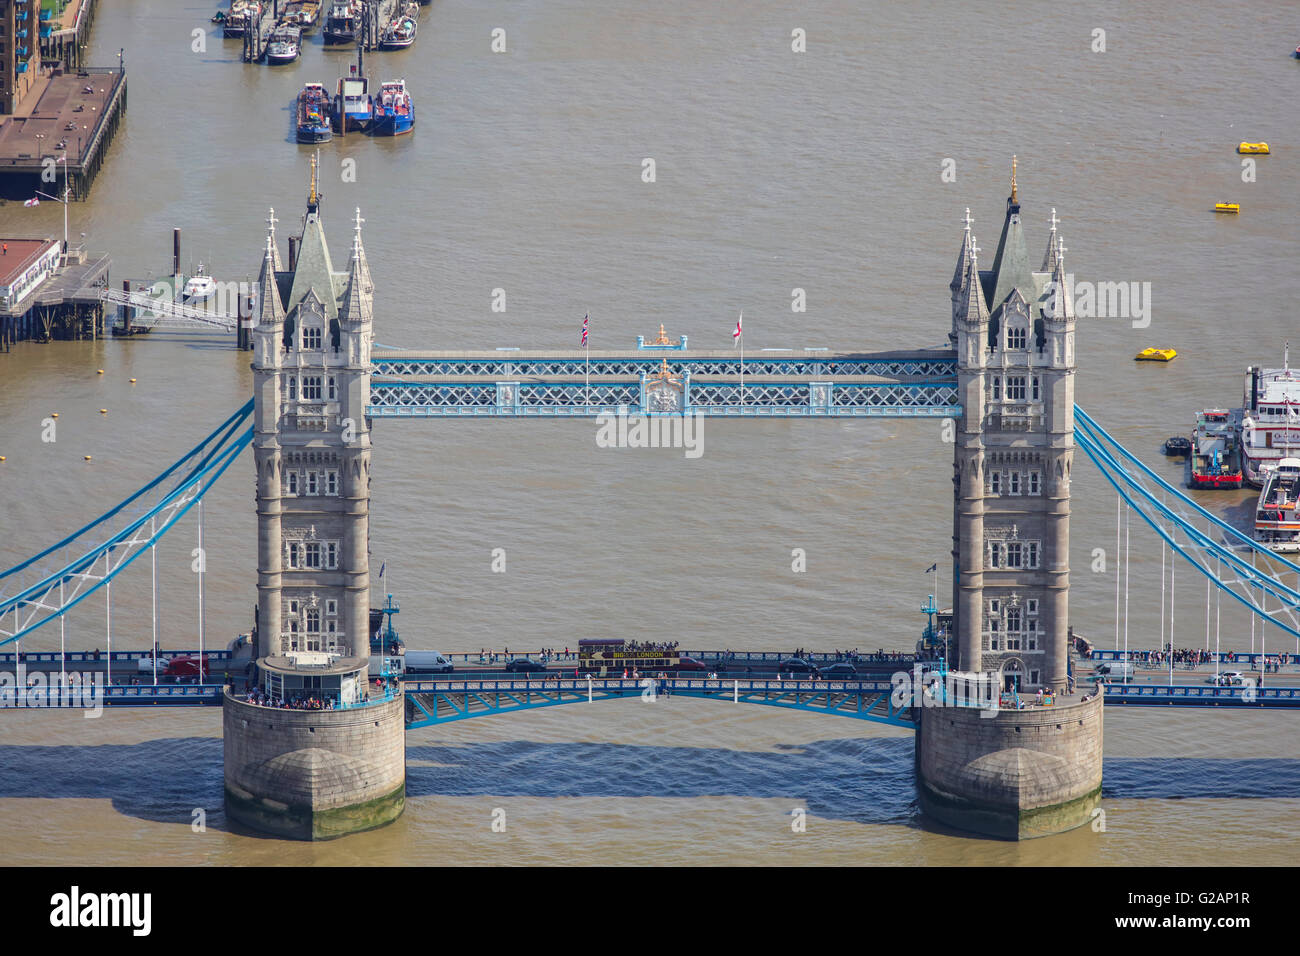 An aerial view of the iconic Tower Bridge Stock Photo